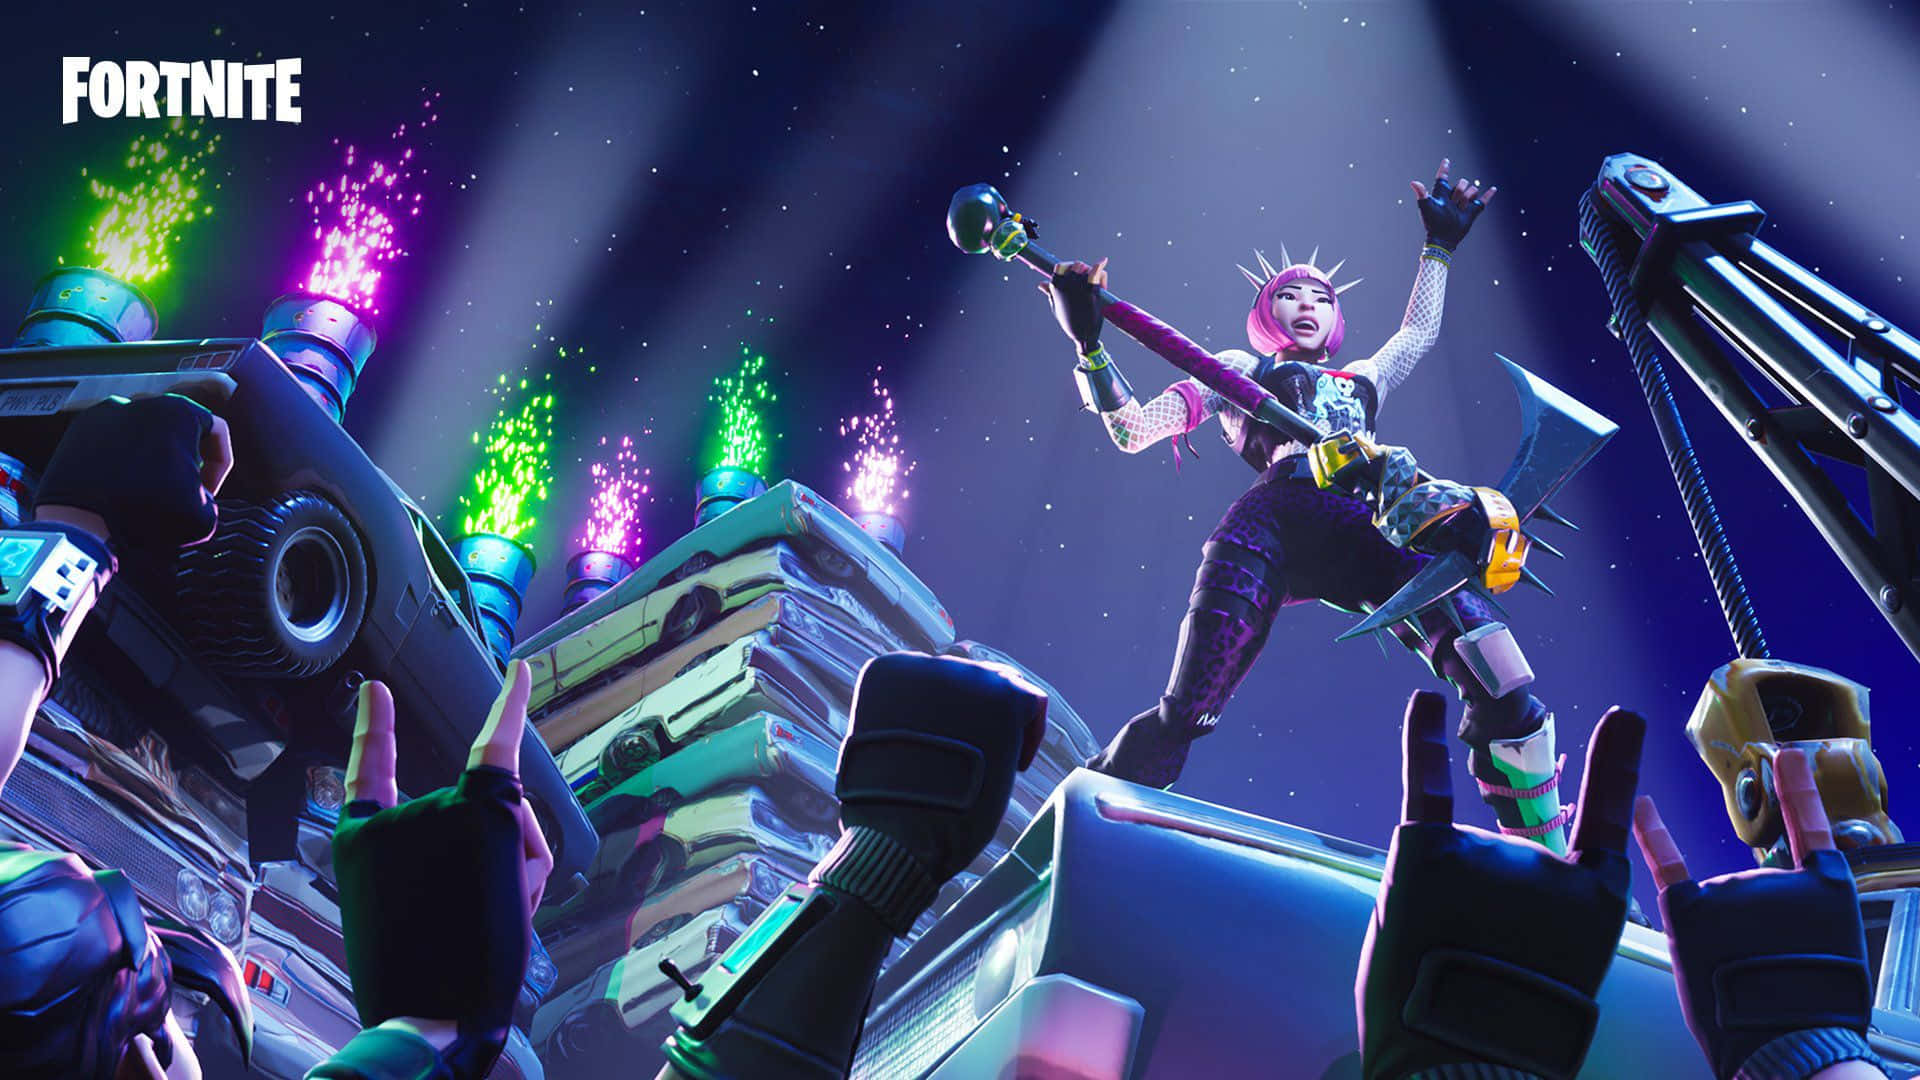 Fortnite - A Man Is Holding A Guitar And Singing Wallpaper